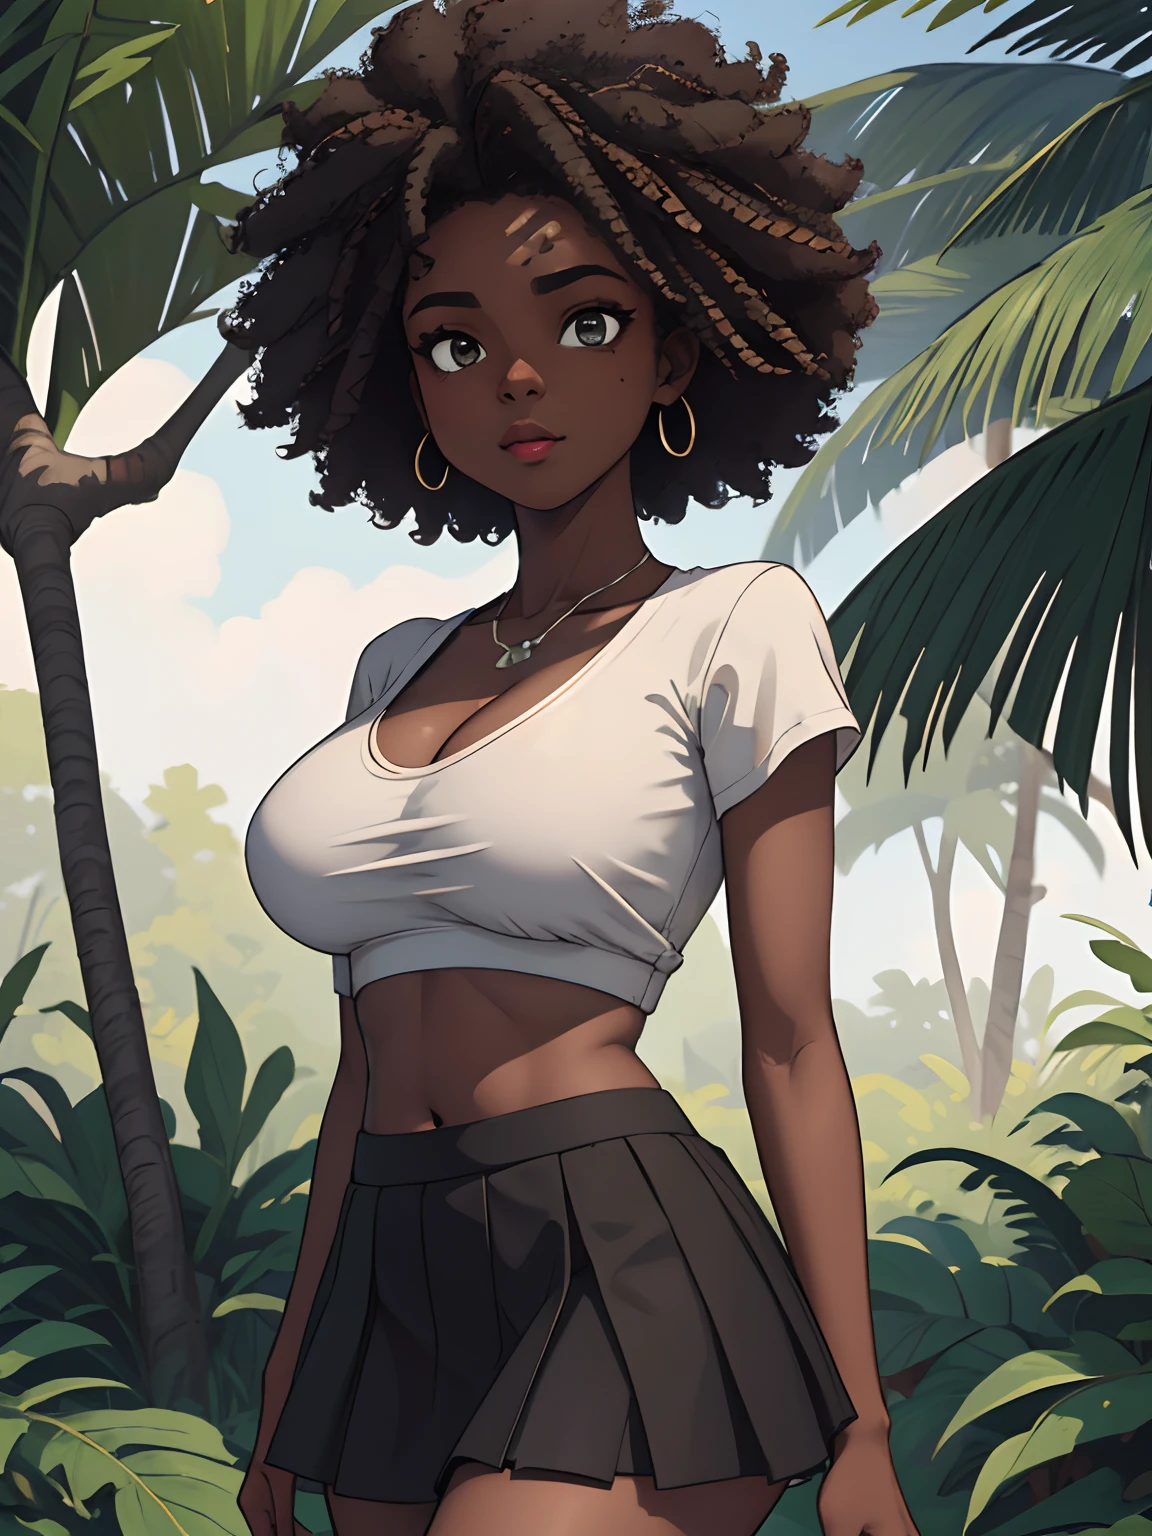 SFW, uploaded on e621, by Pixelsketcher, by Bayard Wu, by Thomas Benjamin Kennington , by Einshelm, solo anthro, ((face portrait)), BREAK, ((mini under boob tee, short skirt)), natural park, ((wearing bra, showing belly button)), ((huge afro)),(detailed Bonifasko lighting), (detailed skin), (detailed deep ebony skin), (dark skin, ebony, deep ebony), (her own arm holding her own head), BREAK, ((mini under boob tee, short skirt)), ((natural park)), ((facing viewer)), (cinematic lighting), ((detailed background)), ((face portrait view)), (((portrait view))), (half body shadow), [backlighting], [crepuscular ray], [detailed ambient light], [gray natural lighting], [ambient light], (higher detail), [explict content], [sharp focus], (questionable content), (shaded), ((masterpiece), her own arms holding her own head, medium breasts, african girl, African face, African Art, African Art, Commission for High Res, African Art, Art,Sakimichan beautiful, masterpiece, medium breasts, best quality, detailed image, bright colors, detailed face, perfect lighting, perfect shadows, perfect eyes, girl focus, eyes, flawless face, medium breasts, face focus, (huge afro)) African, African girl, dark skin, deep ebony woman, ebony nose, sexy mouth, gaze at the viewer, eyes, 1girl, solo, (masterpiece), (best quality), (illustration), (cinematic lighting), detailed dark skin, balanced coloring, global illumination, ray tracing, good lighting, deep ebony, African, showing breasts, cleavage, looking at viewer, seductive look, SFW